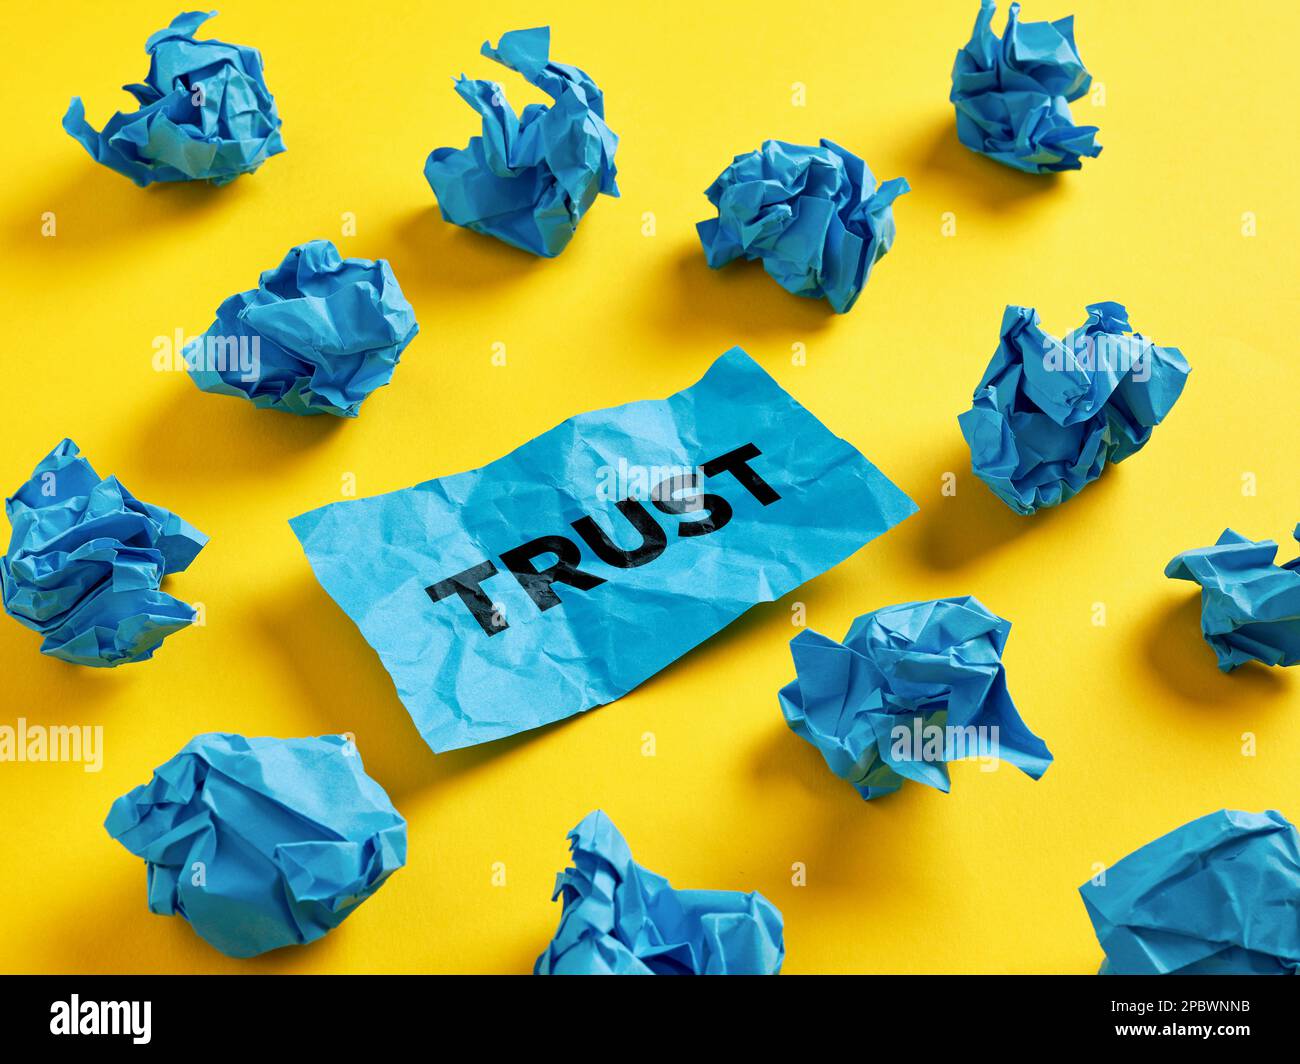 Searching for, finding or revealing the trust or reliability concept. The word trust on piece of paper among the crumpled blue paper balls. Stock Photo